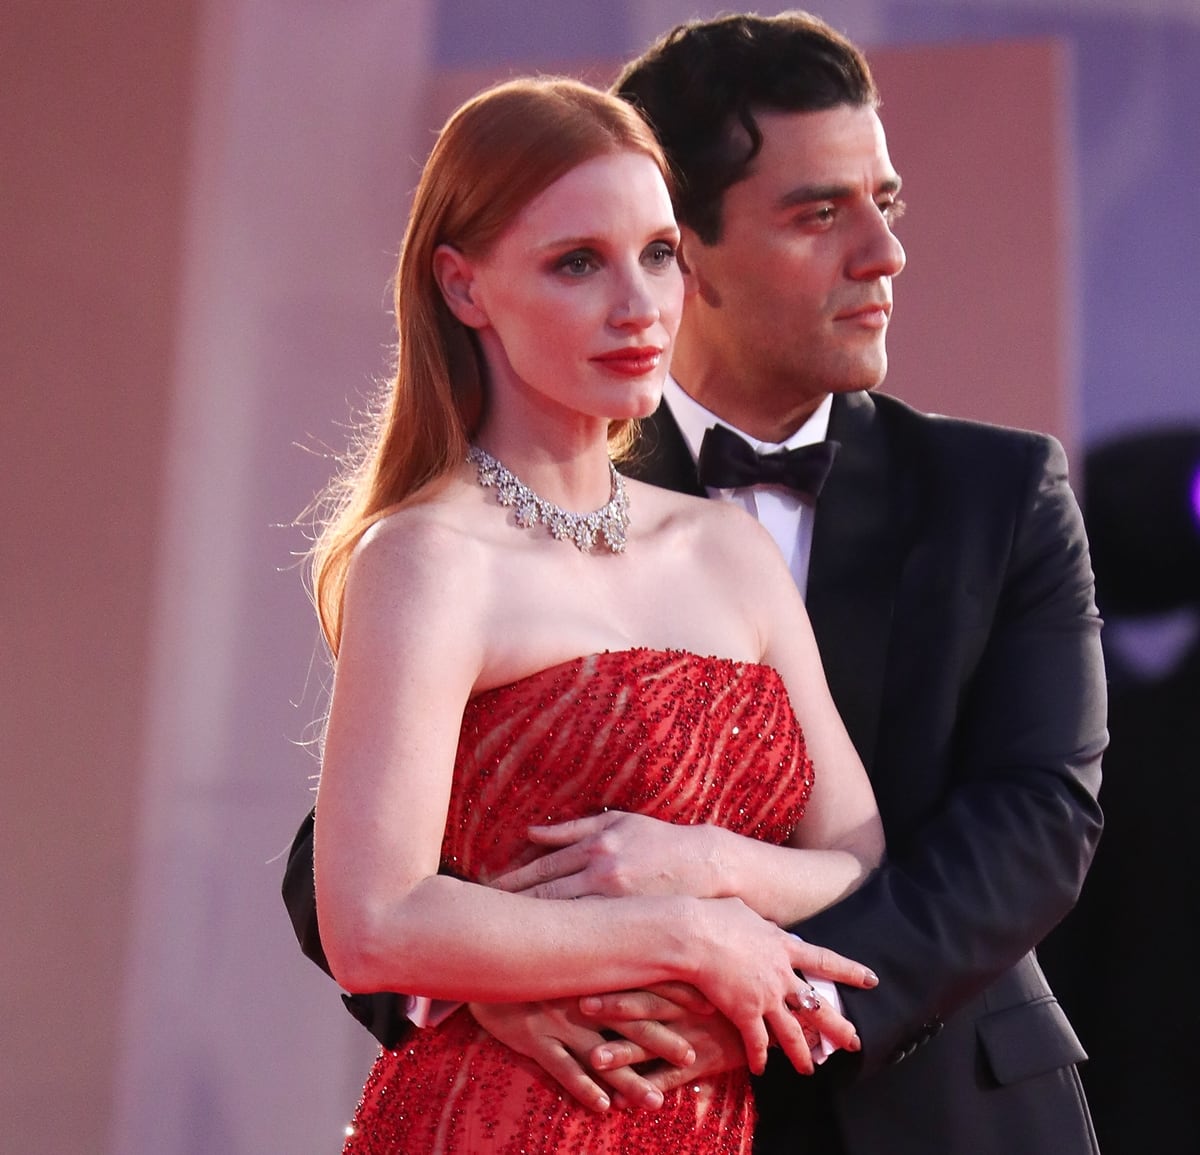 Jessica Chastain and Oscar Isaac with their arms wrapped around each other at the premiere of Scenes from a Marriage, which is a modern adaptation of Ingmar Bergman's classic Swedish series